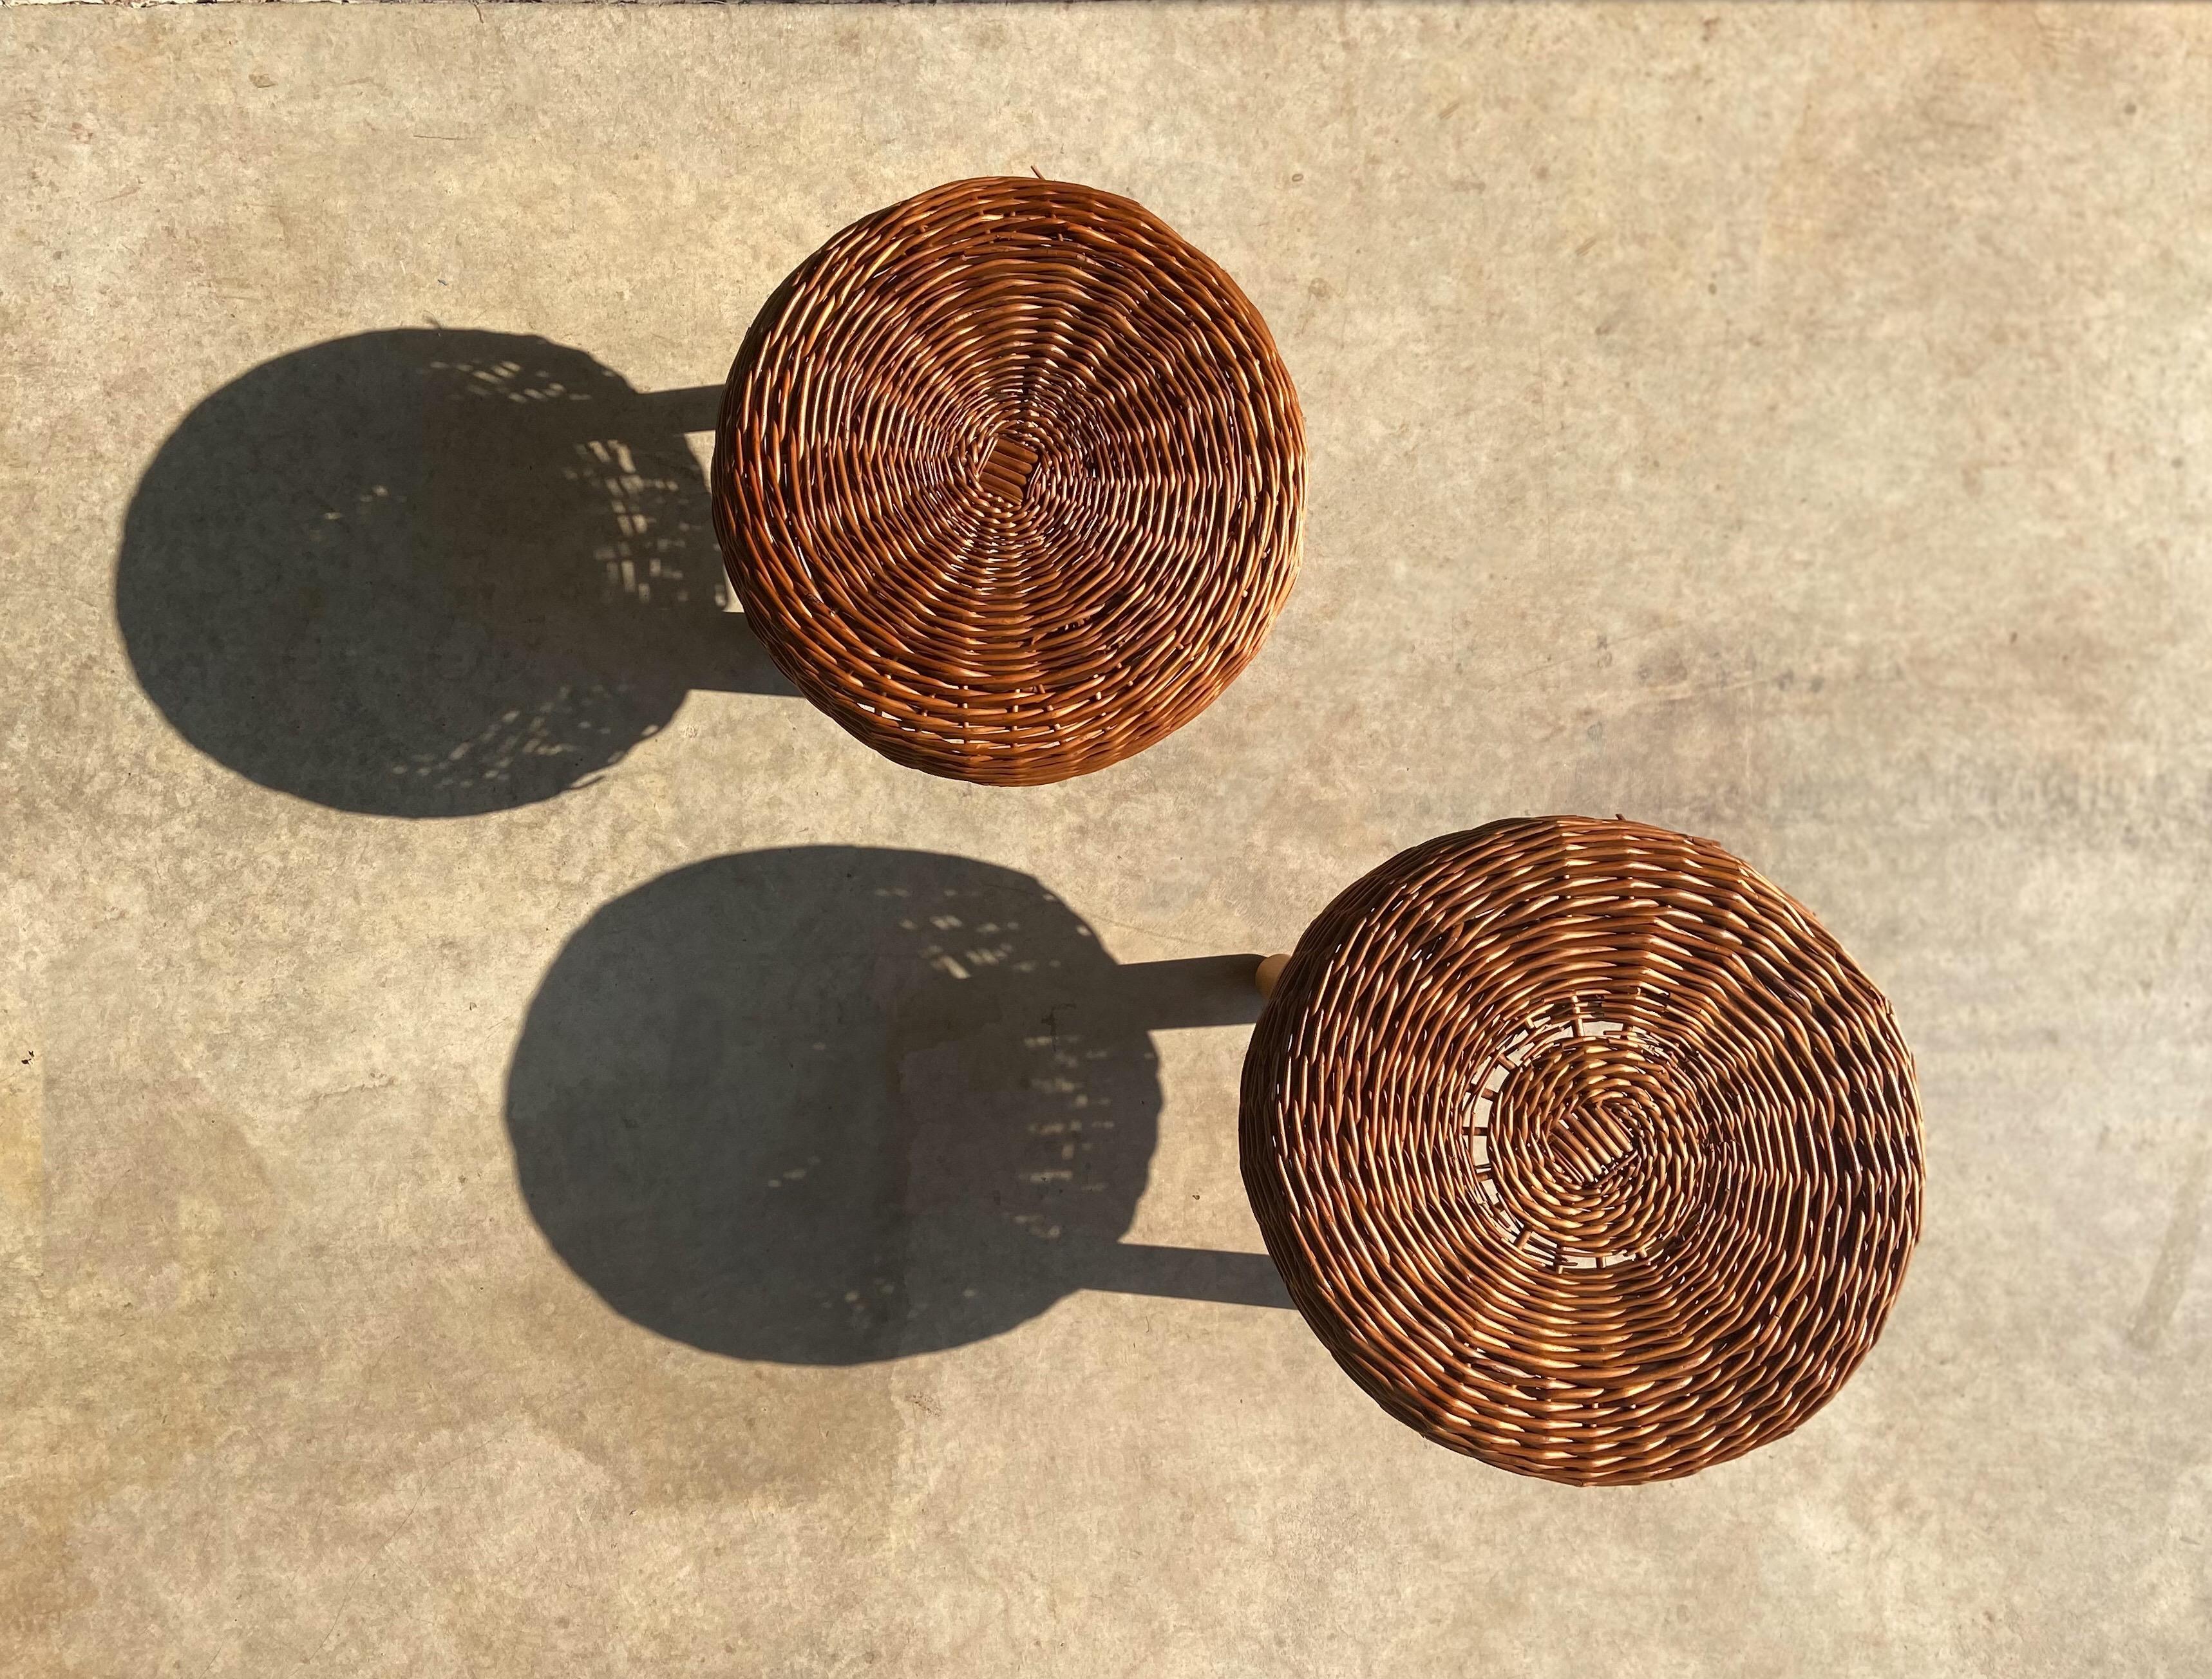 American Vintage Pair of Tony Paul Attributed Woven Rattan Stools, 1960's For Sale